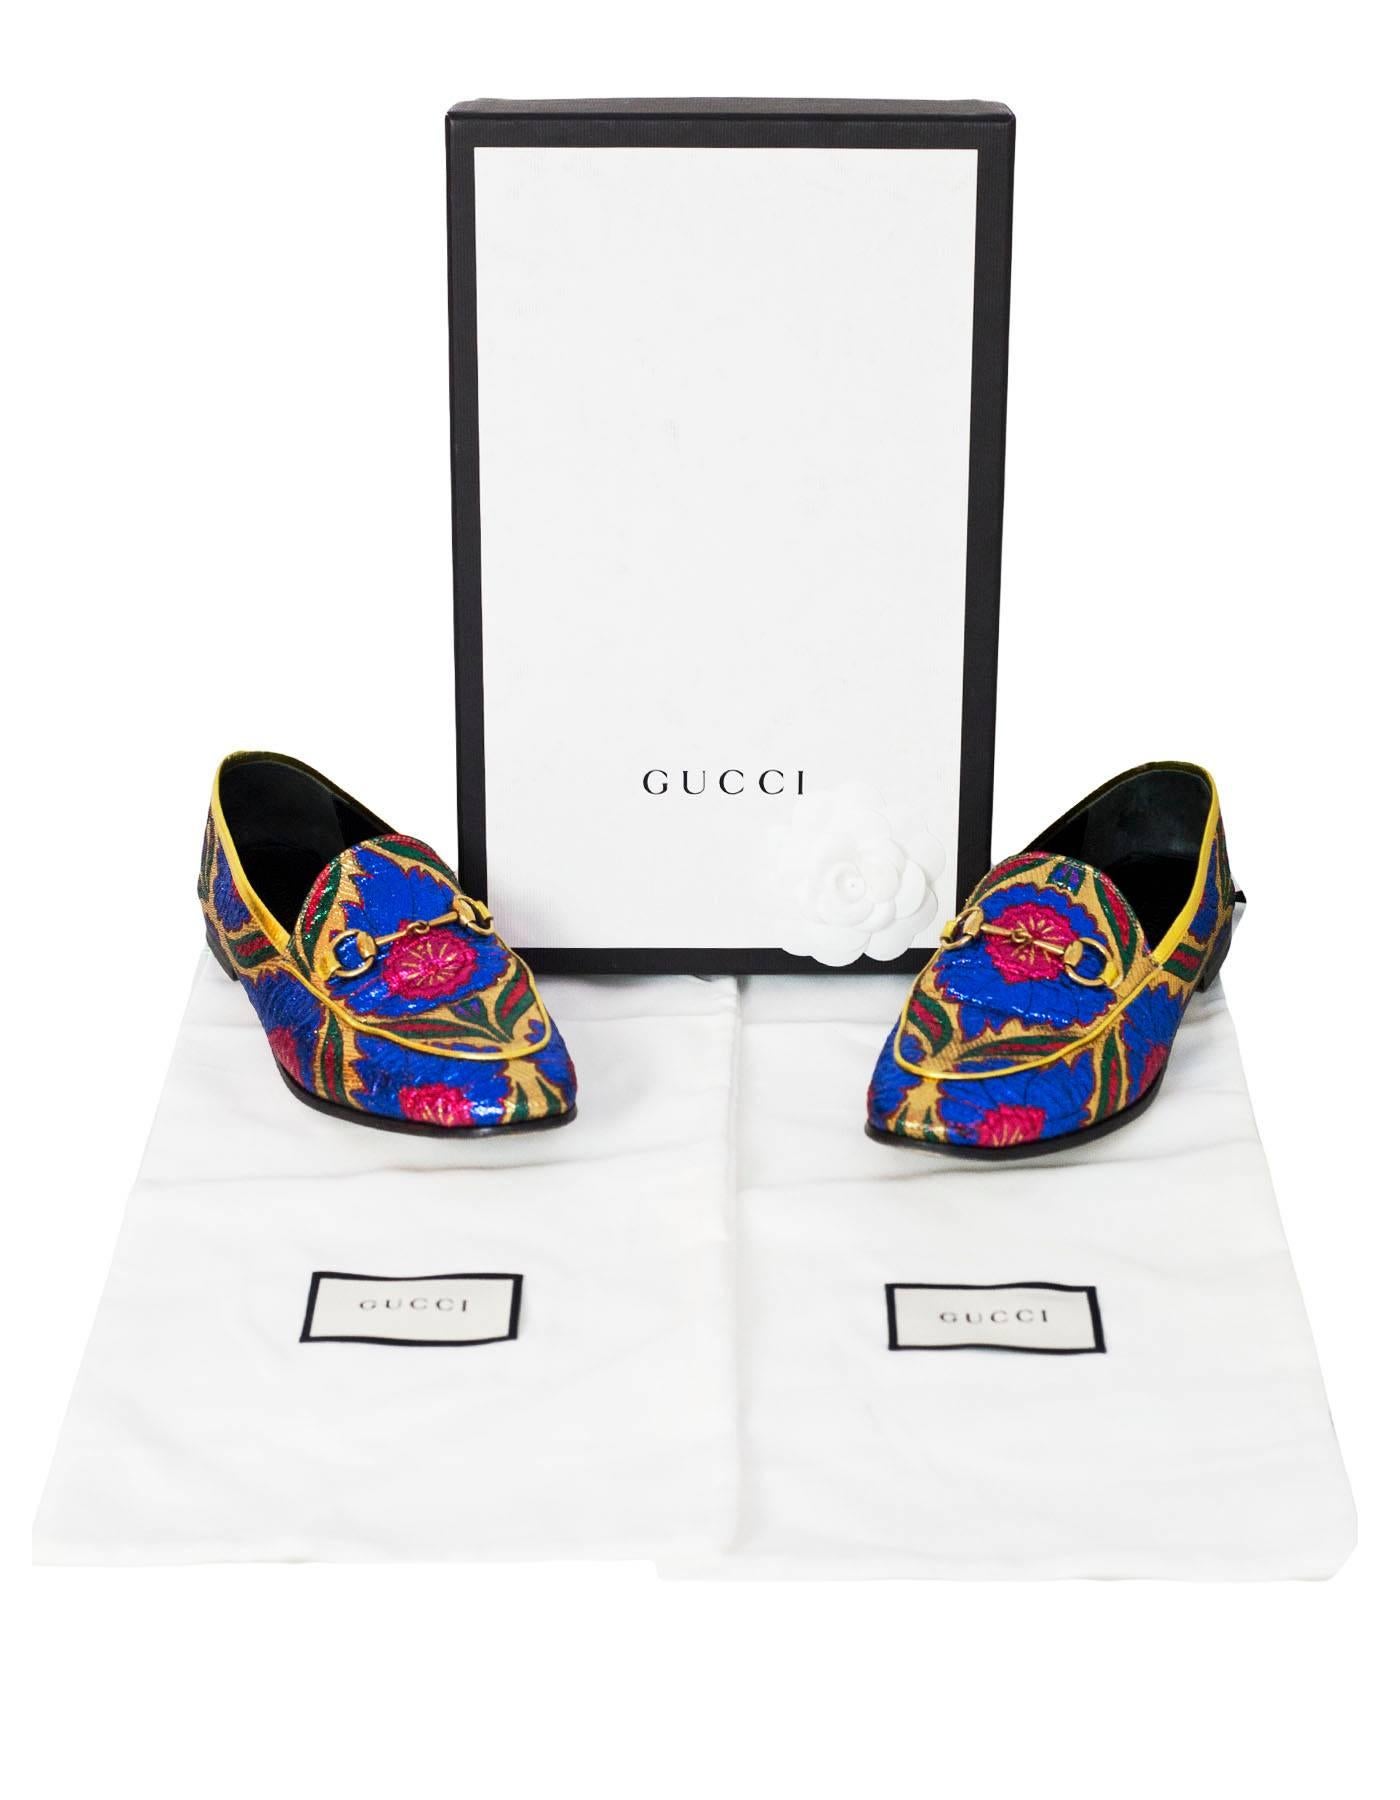 Gucci Brocade Multi-Colored Loafers Sz 38 with Box and DB 2